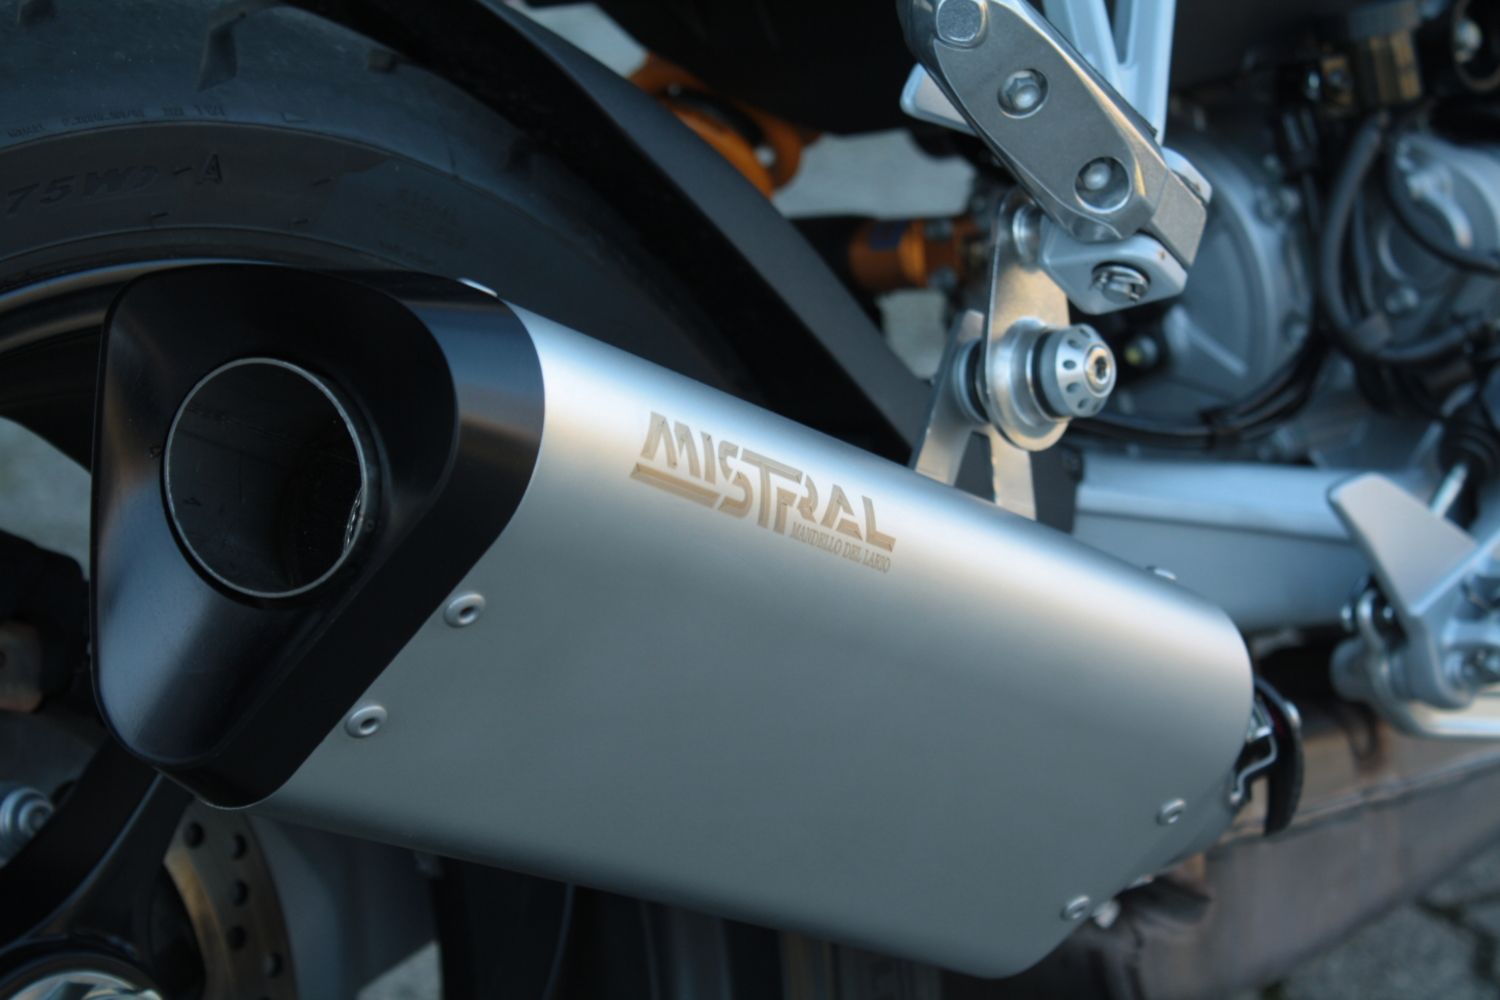 V100 Mandello Tria exhaust by Mistral in polished finish